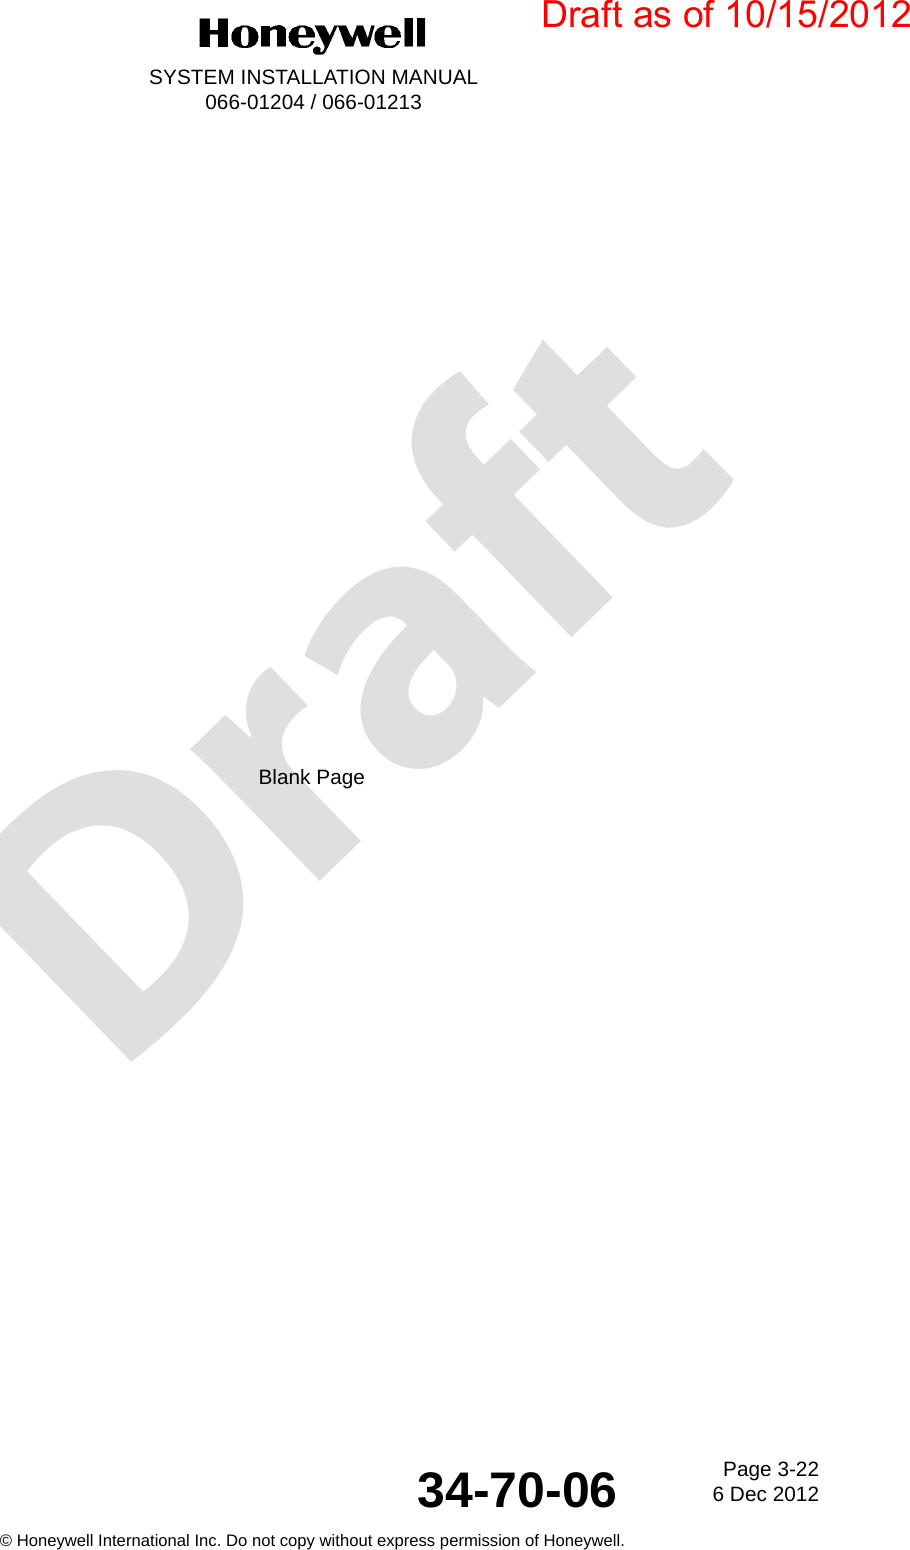 DraftPage 3-226 Dec 201234-70-06SYSTEM INSTALLATION MANUAL066-01204 / 066-01213© Honeywell International Inc. Do not copy without express permission of Honeywell.Blank PageDraft as of 10/15/2012